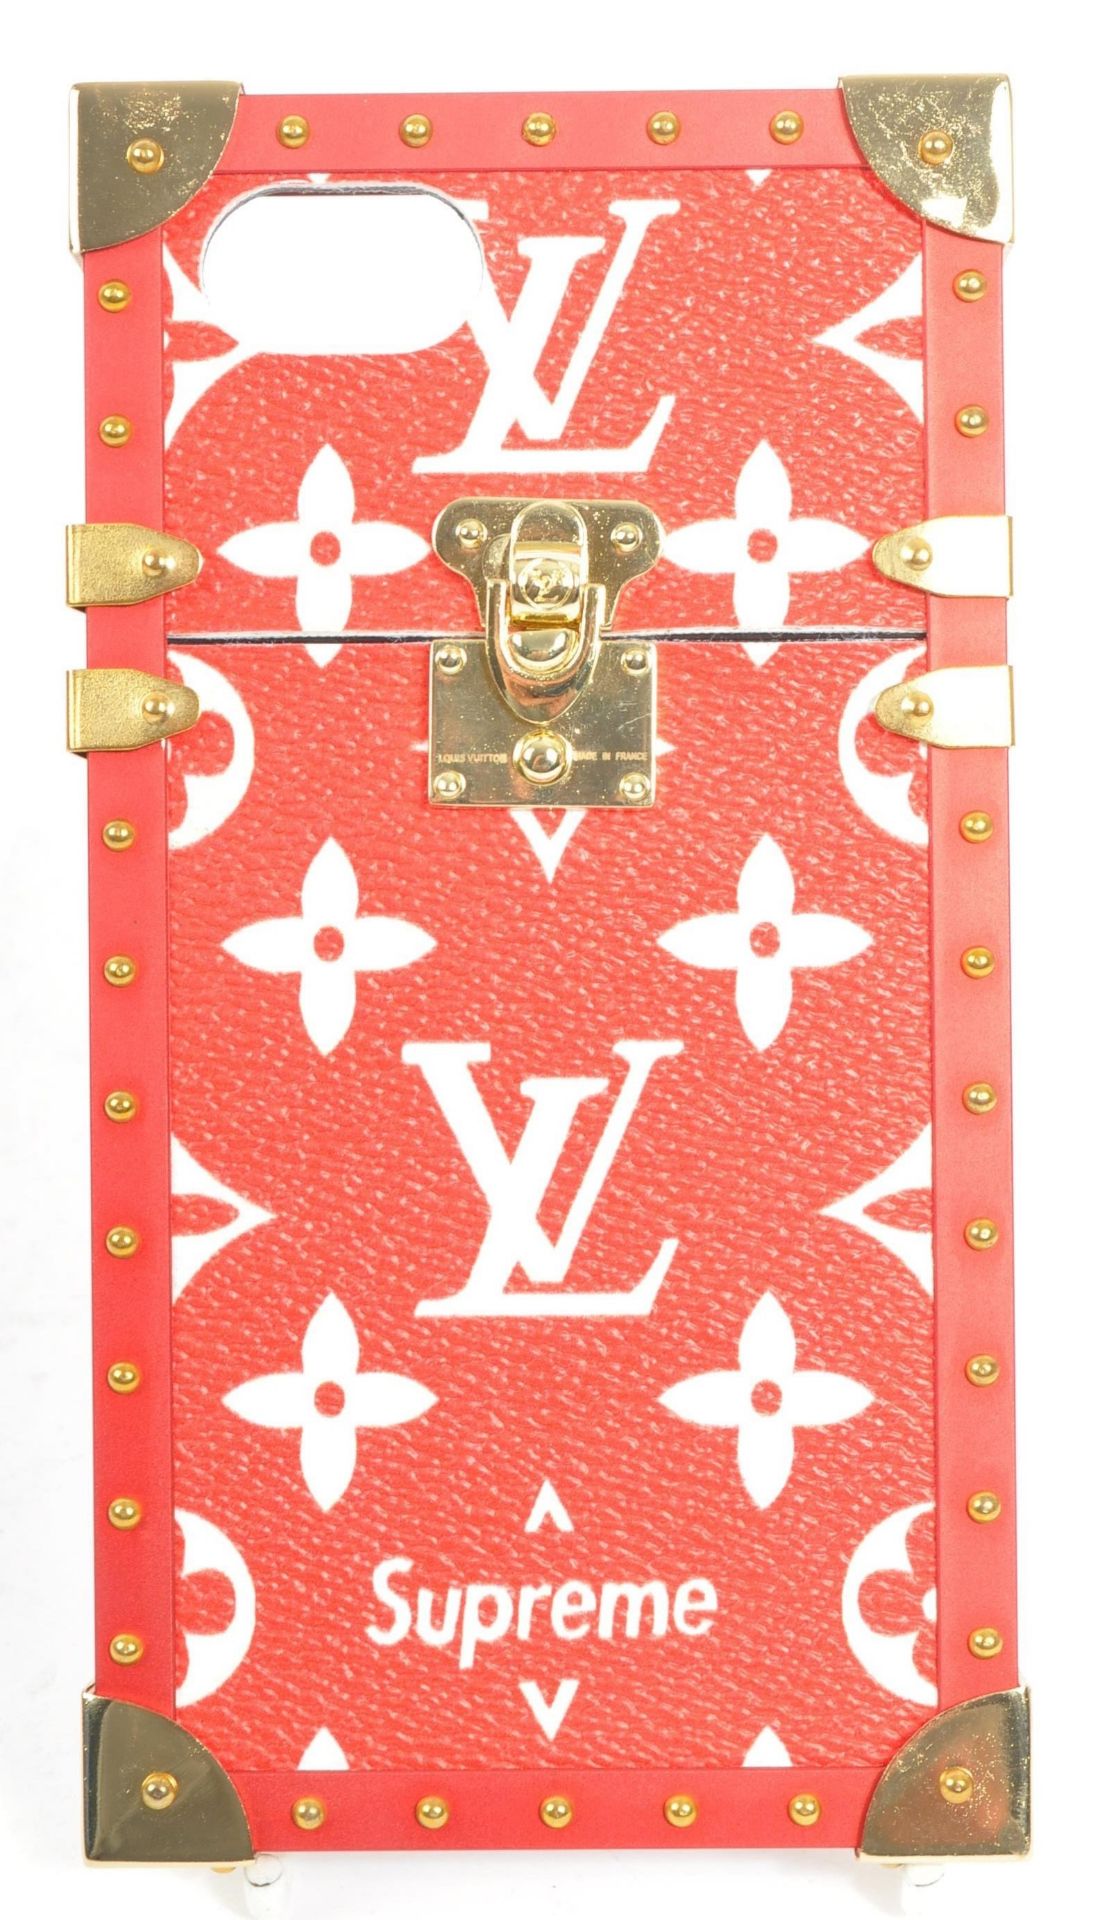 LOUIS VUITTON X SUPREME RED / GOLD IPHONE 7 CASE IN BOX - Image 4 of 7